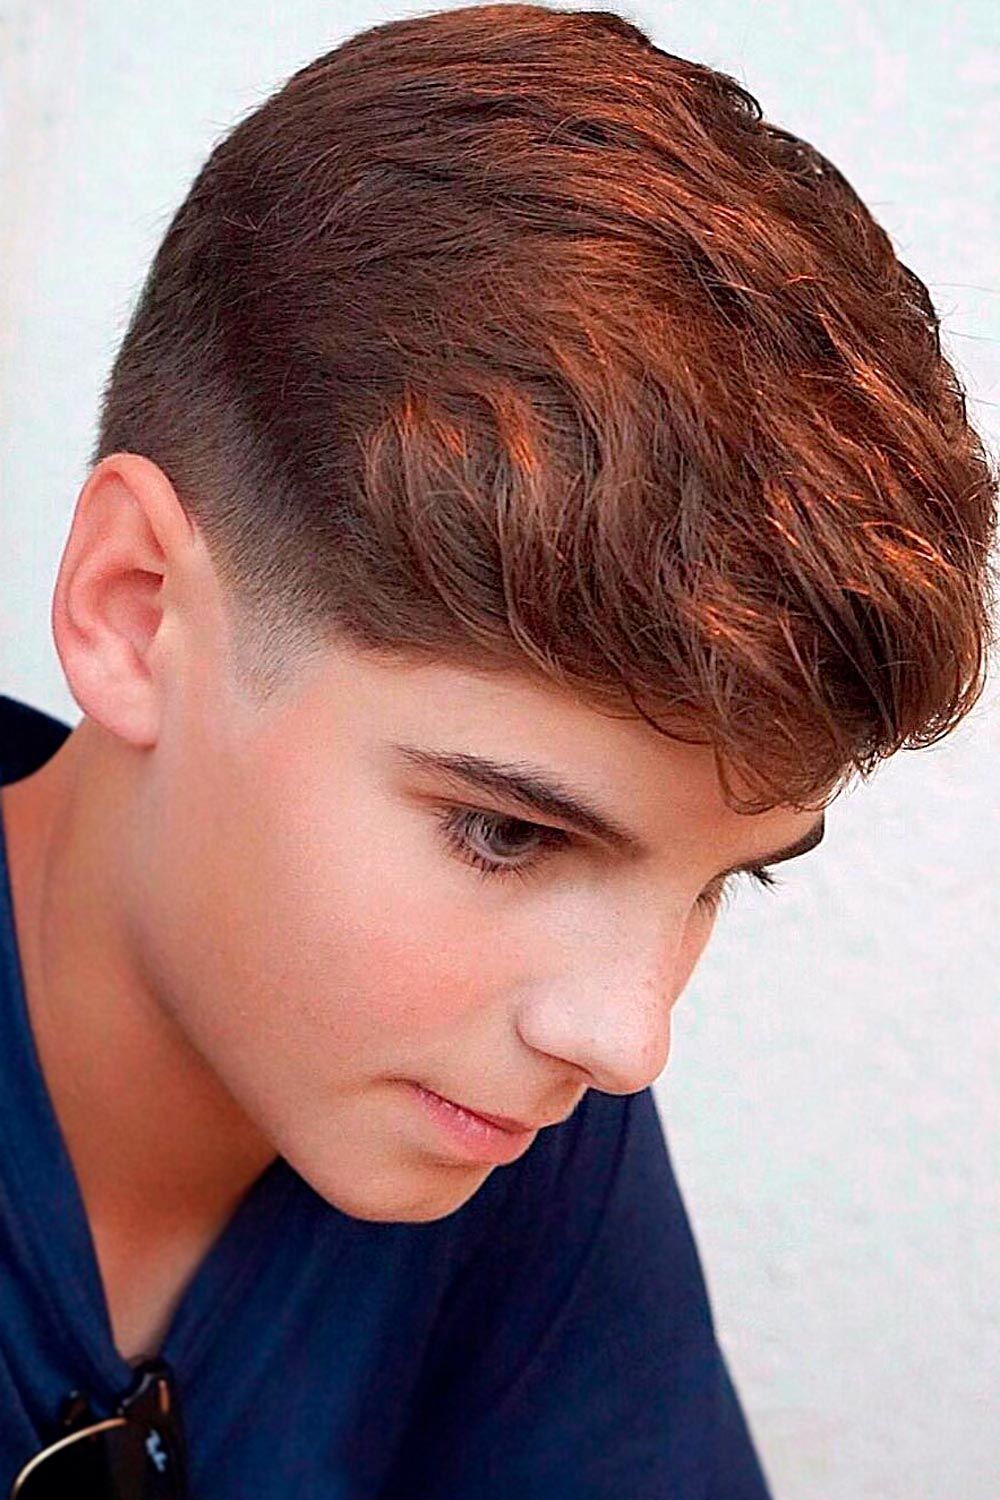 Layered Pixie Boys Haircuts, hairstyles for boys, boys hairstyles, boys haircut, stylish boy haircuts, boy's haircuts